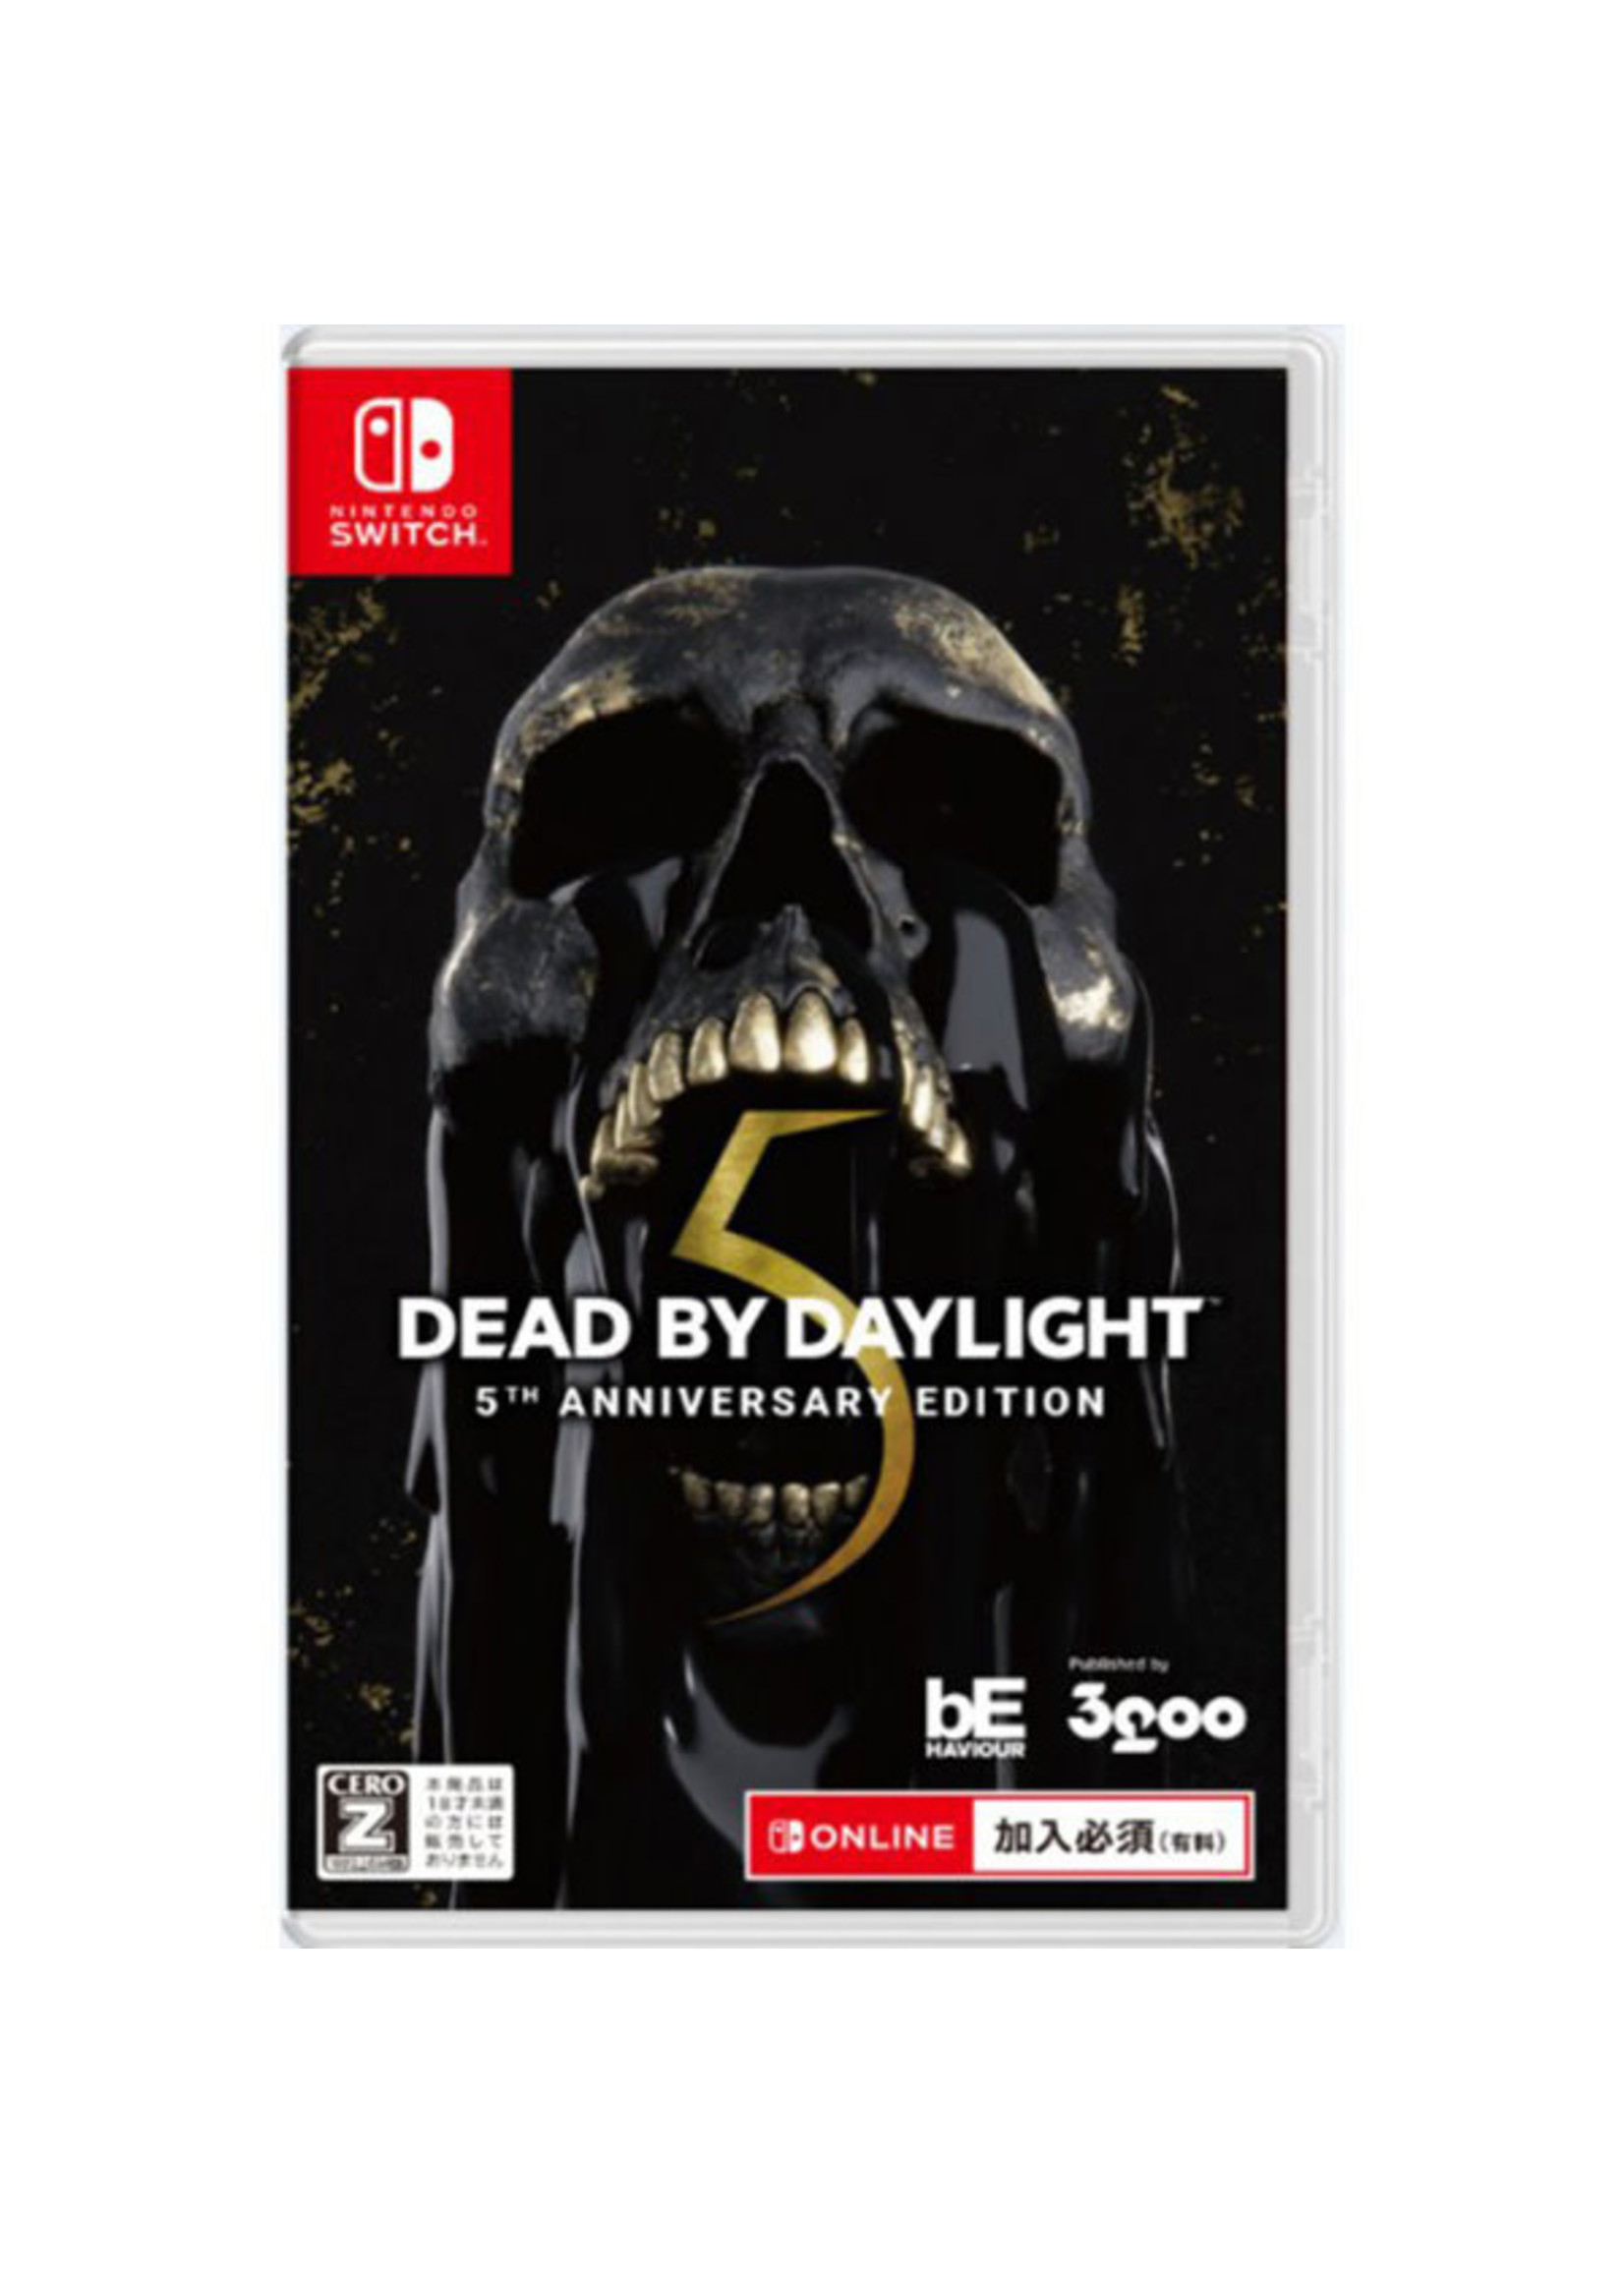 Dead By Daylight 5th Anniversary (Japanese Release) (English Language) SWITCH